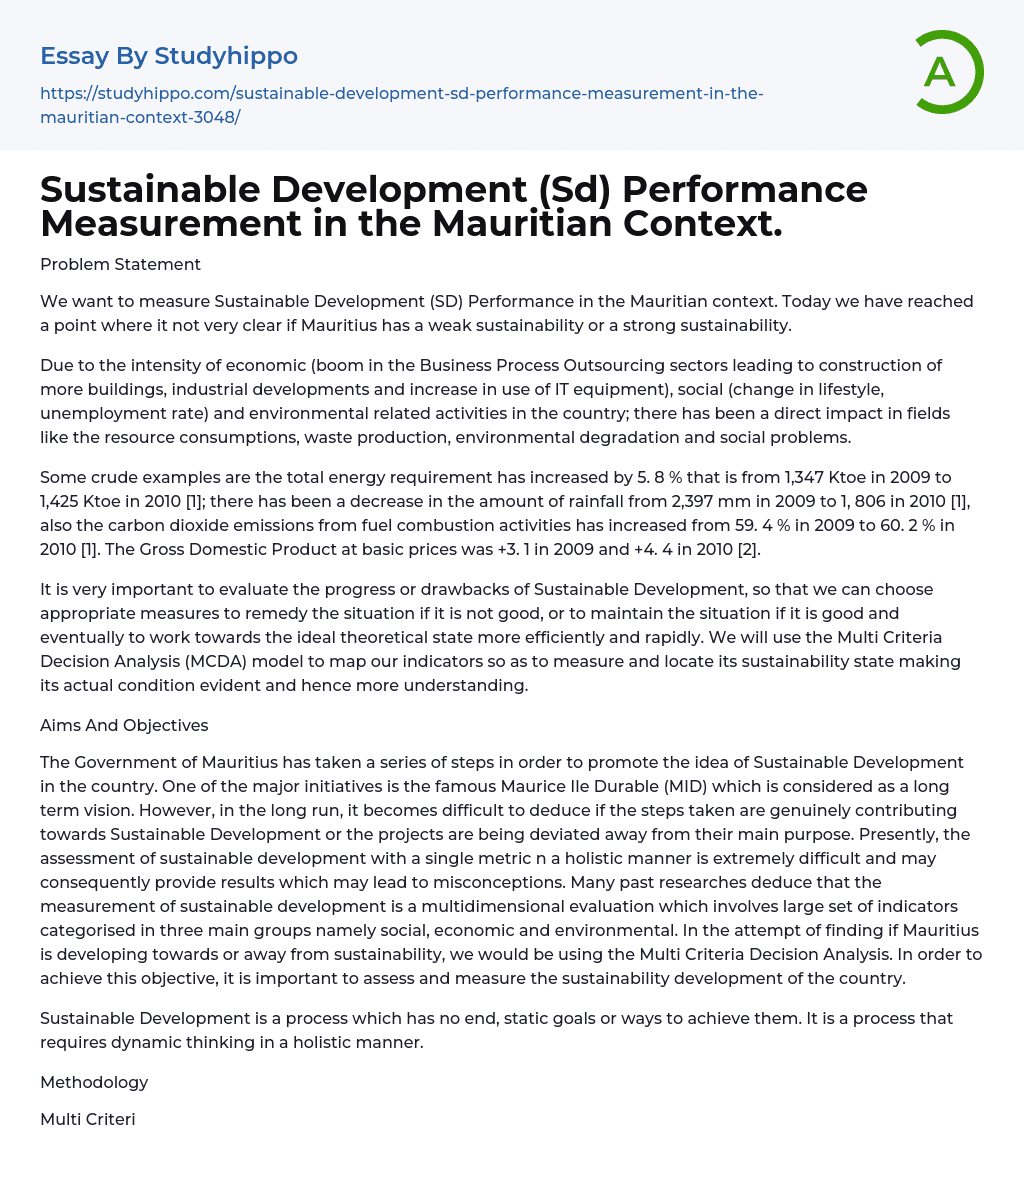 Sustainable Development (Sd) Performance Measurement in the Mauritian Context. Essay Example